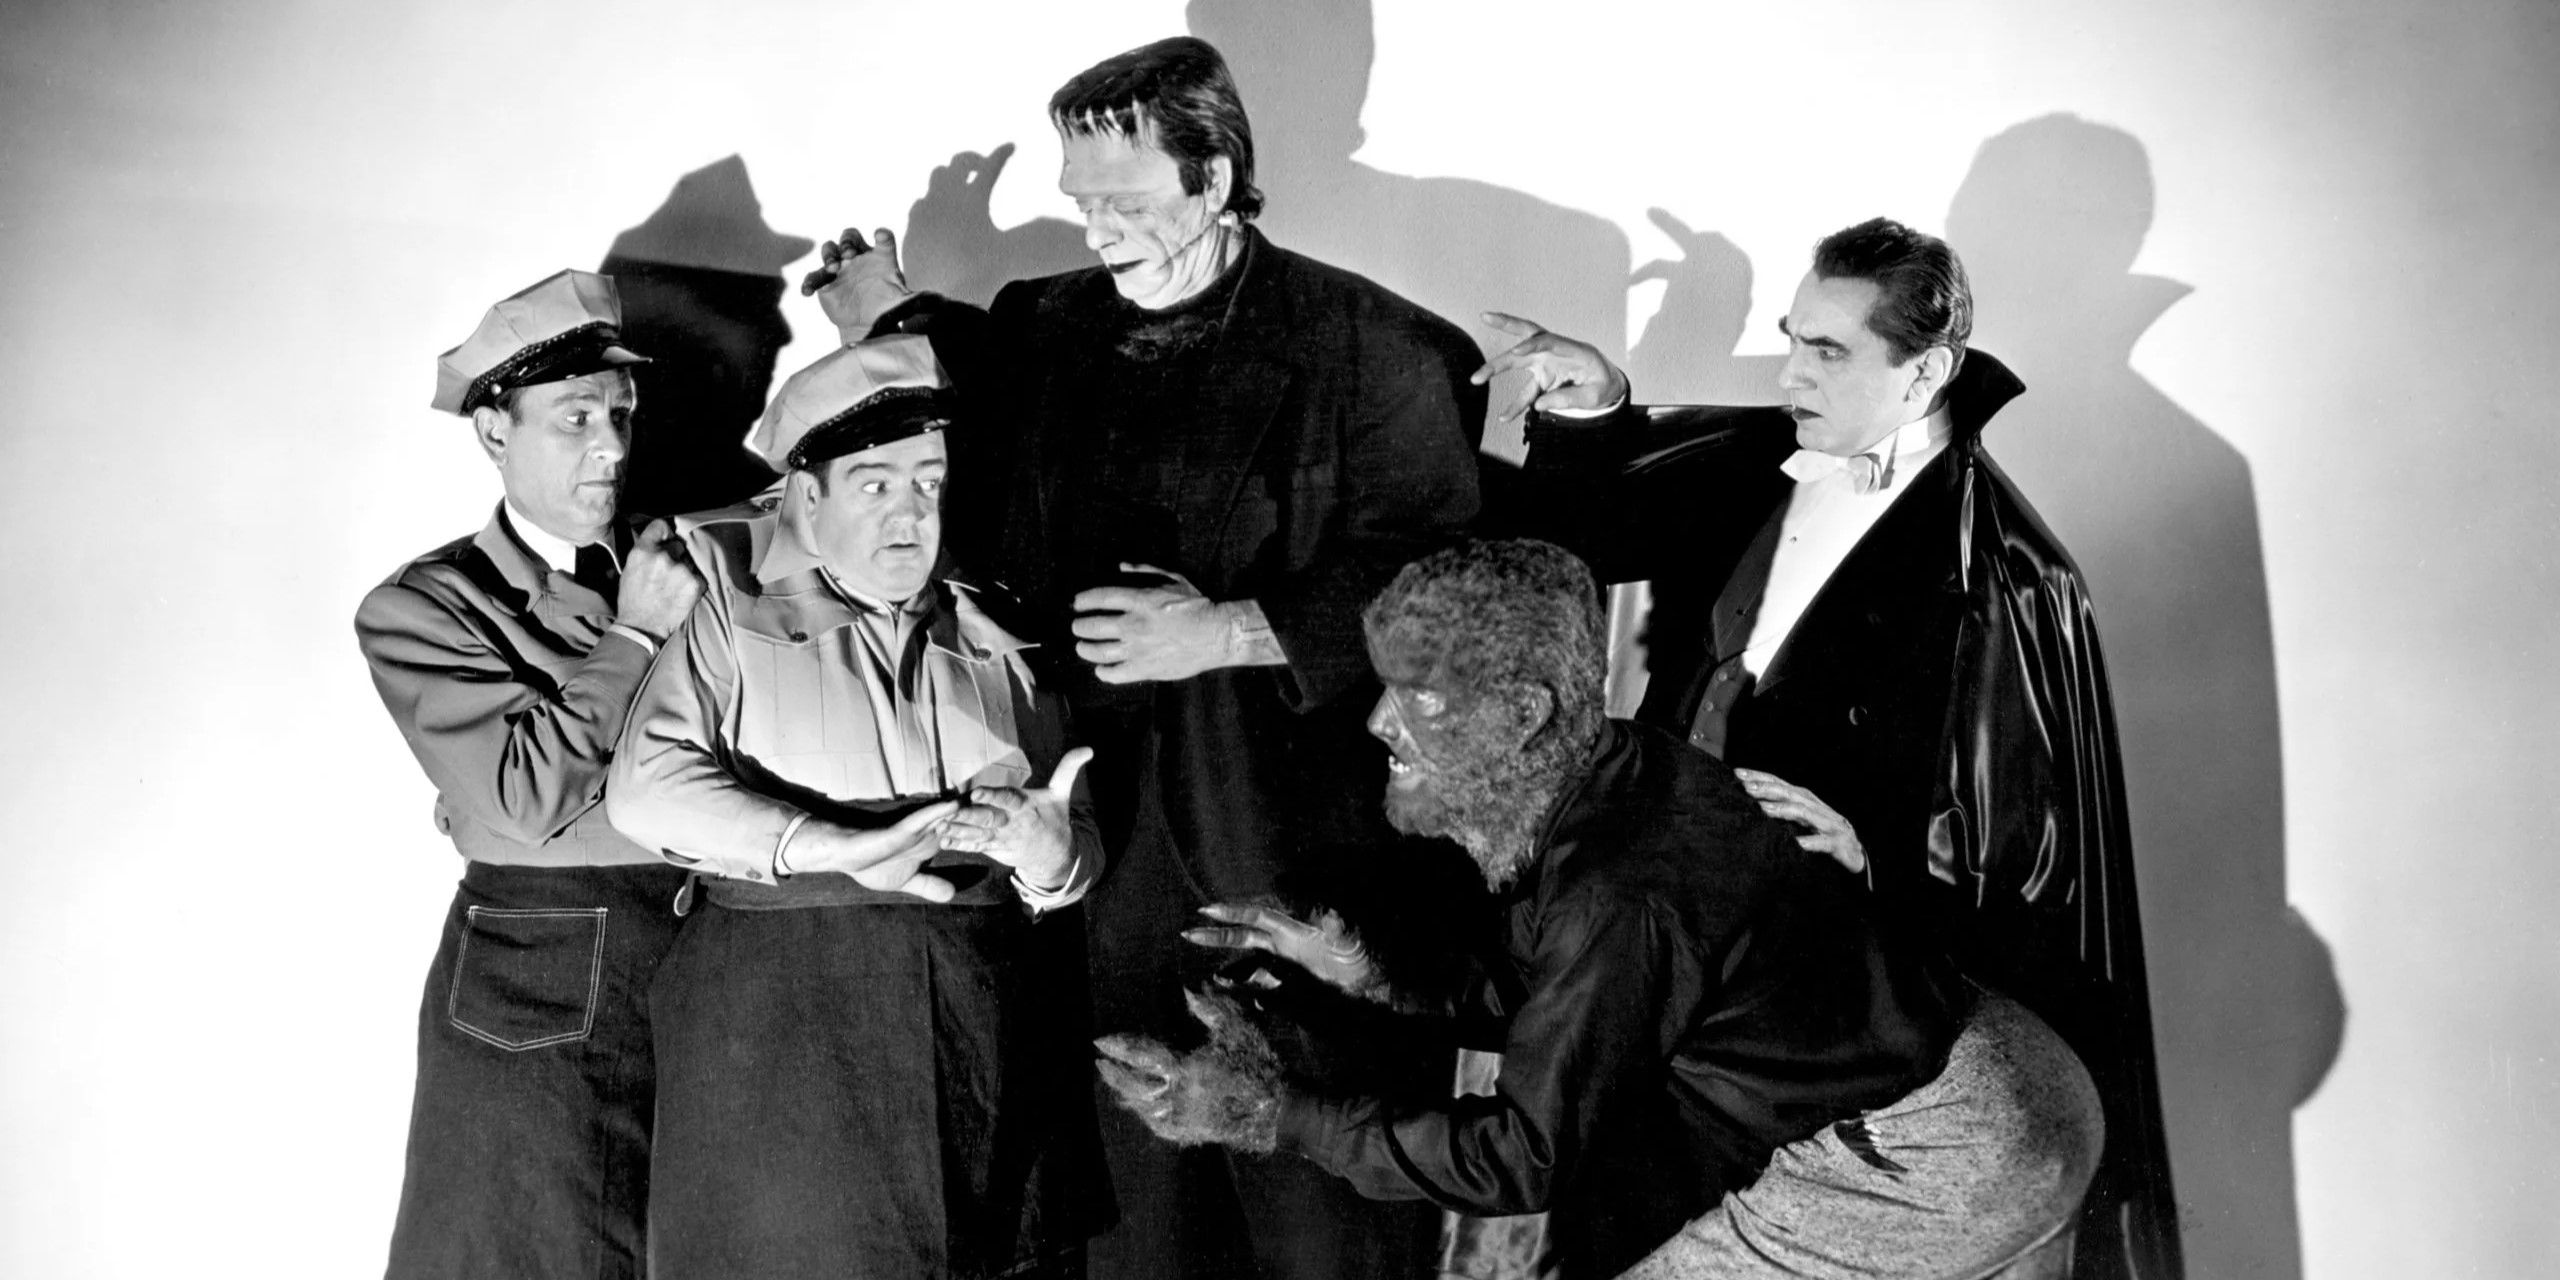 abbott and costello meet frankenstein's monster, Bela Lugosi's Dracula, and Wolfman in a Universal Monster Horror Comedy